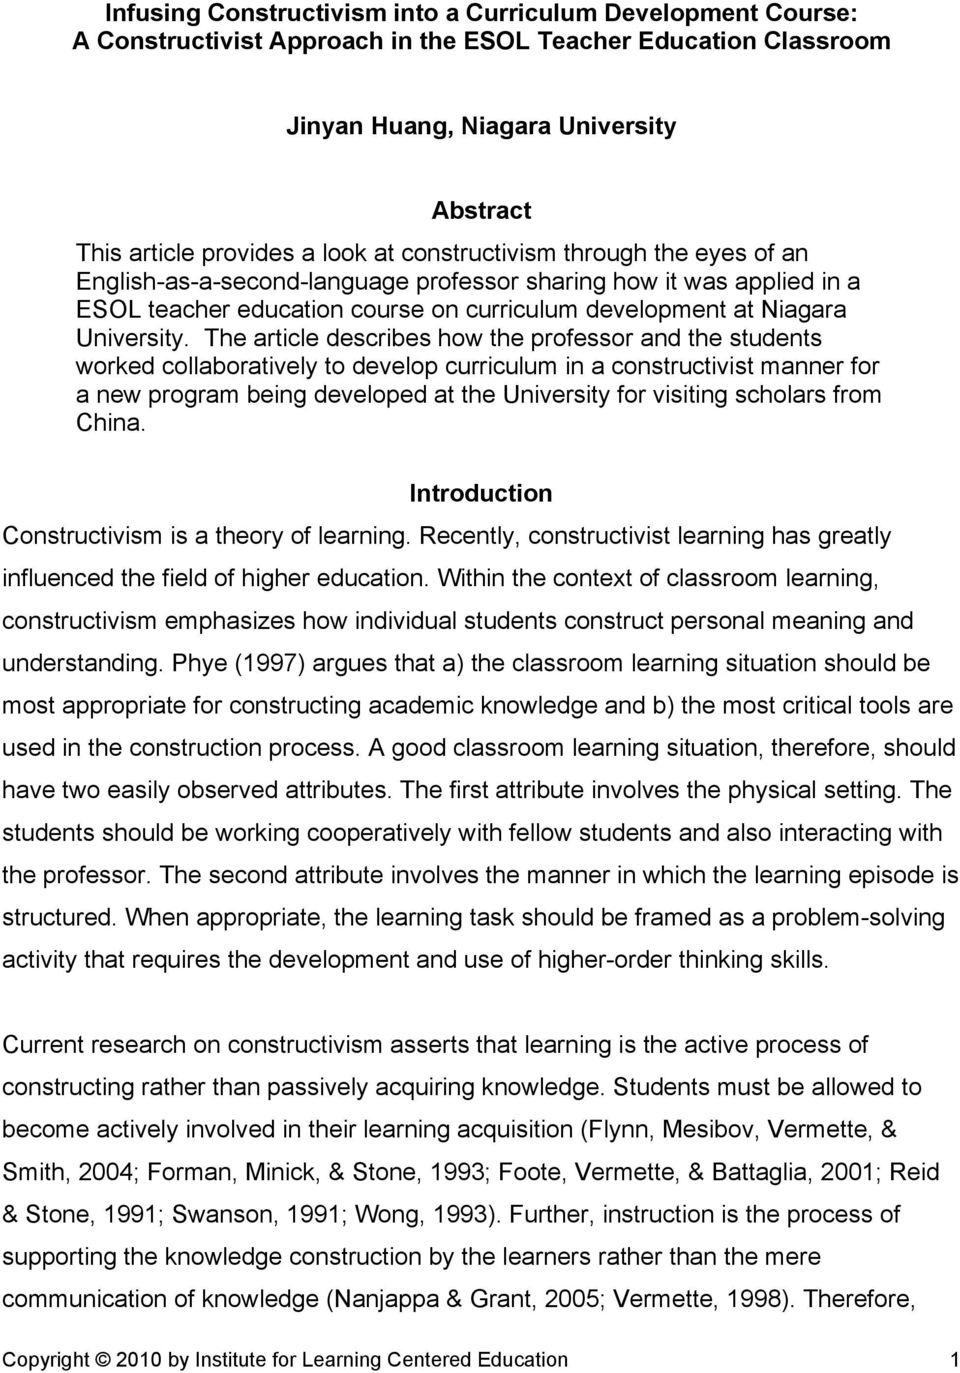 The article describes how the professor and the students worked collaboratively to develop curriculum in a constructivist manner for a new program being developed at the University for visiting